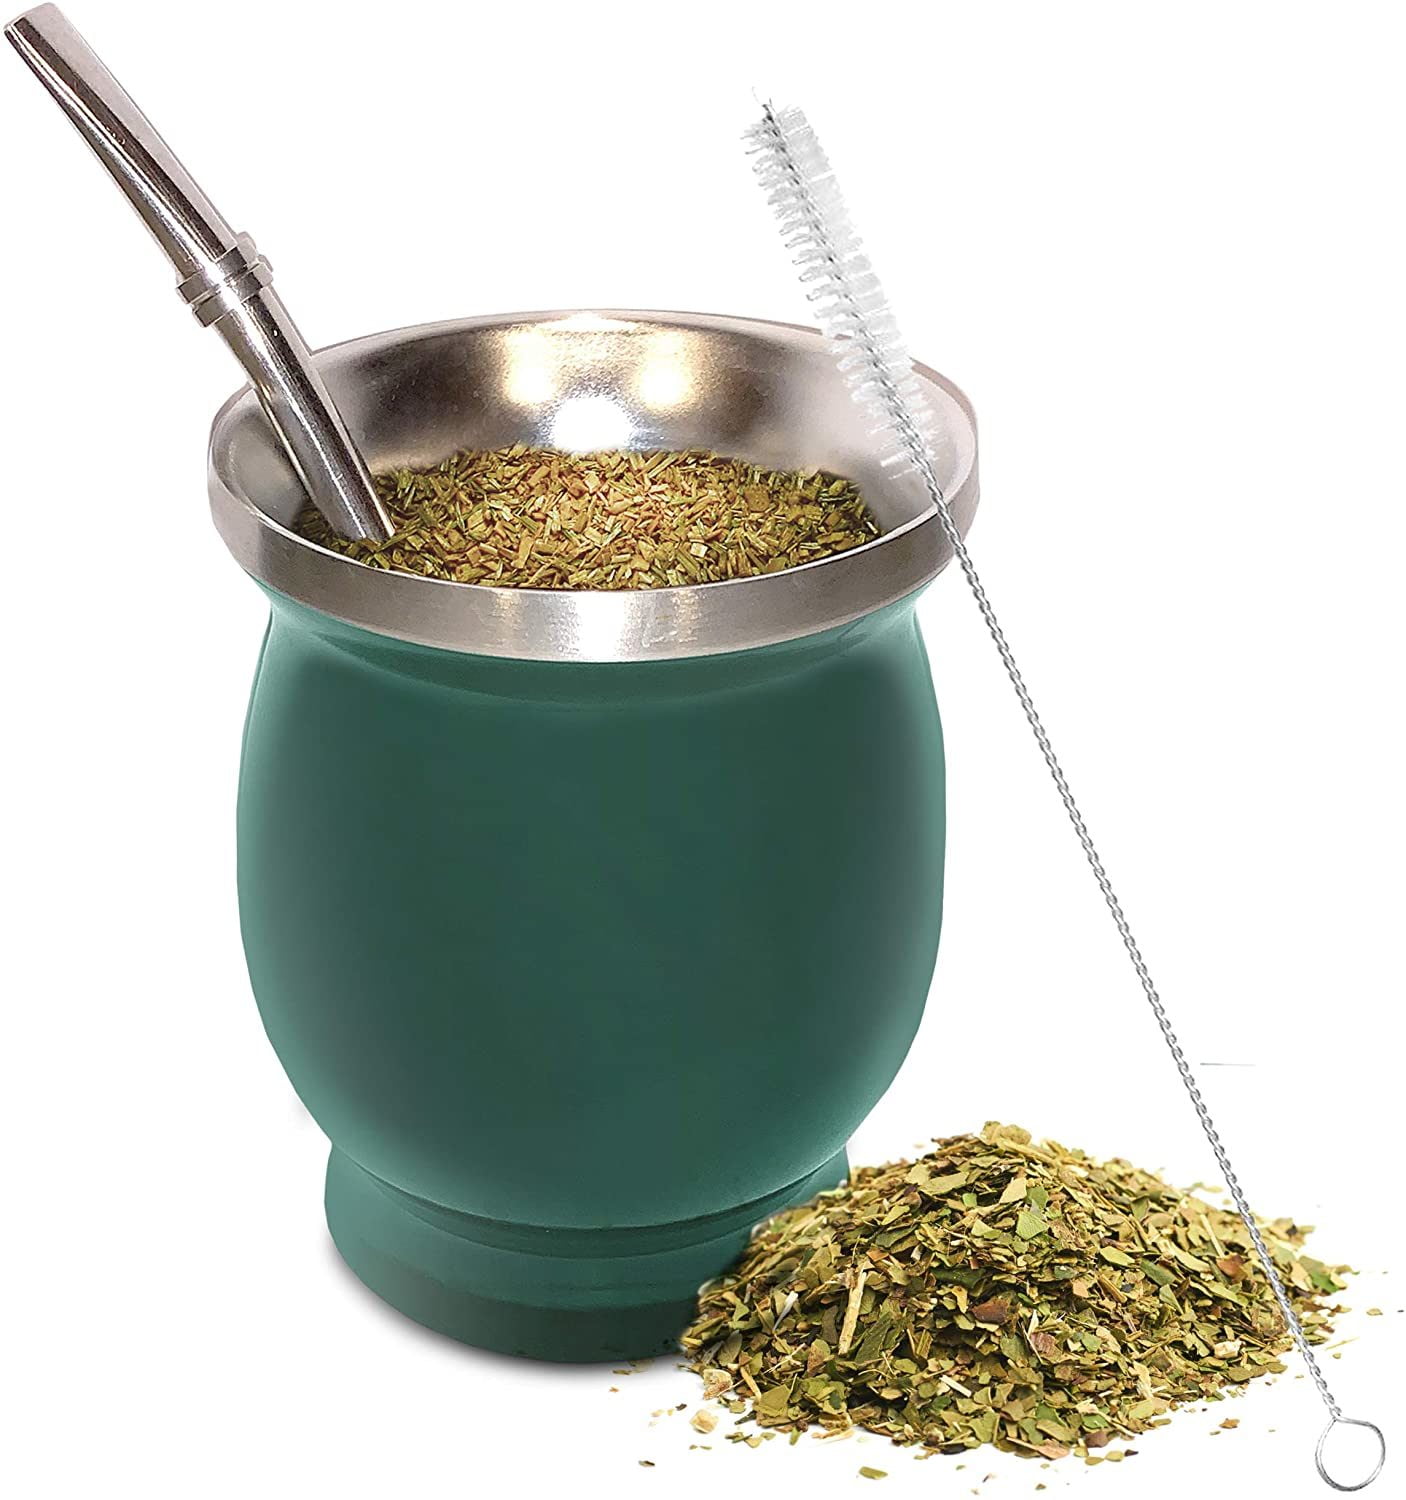 Black Bottom Silver Top Yerba Mate Gourd Mate Cup and Bombilla Mate Tea Set Yerba Mate Cup 4 Oz Yerba Mate Gourd Cup Double Walled 2 Color Stainless Steel Cup with Mate Straw